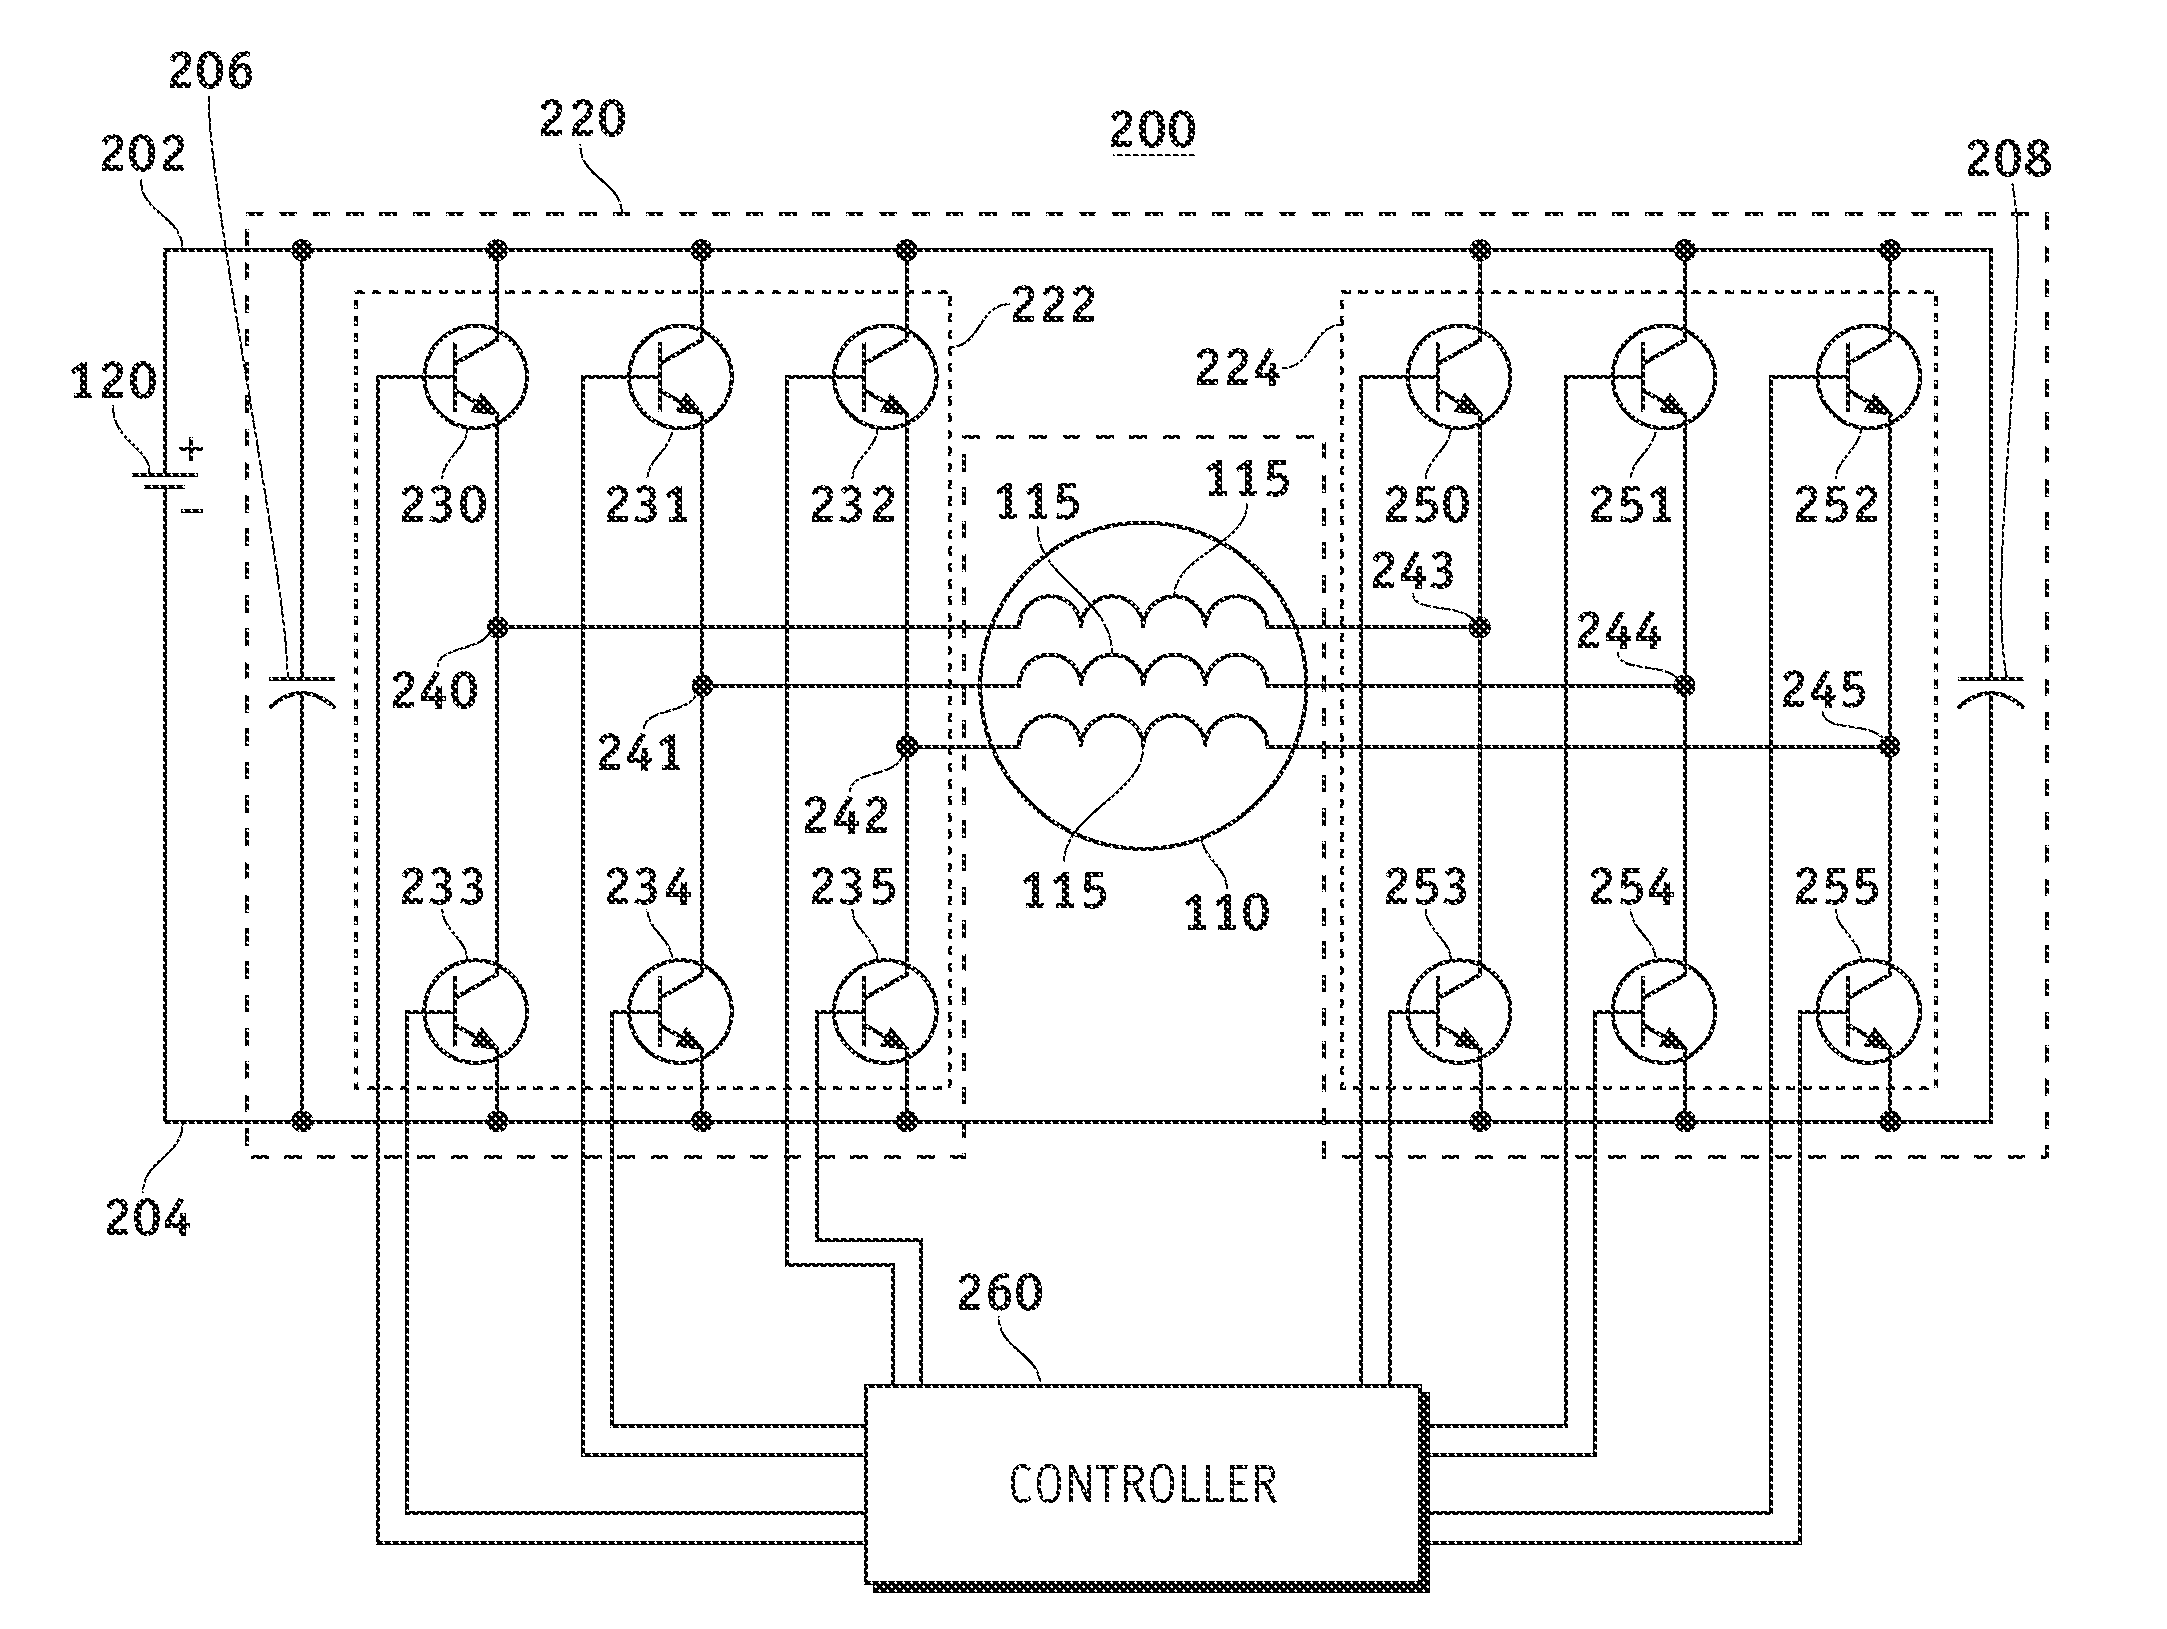 Inverter topology for an electric motor